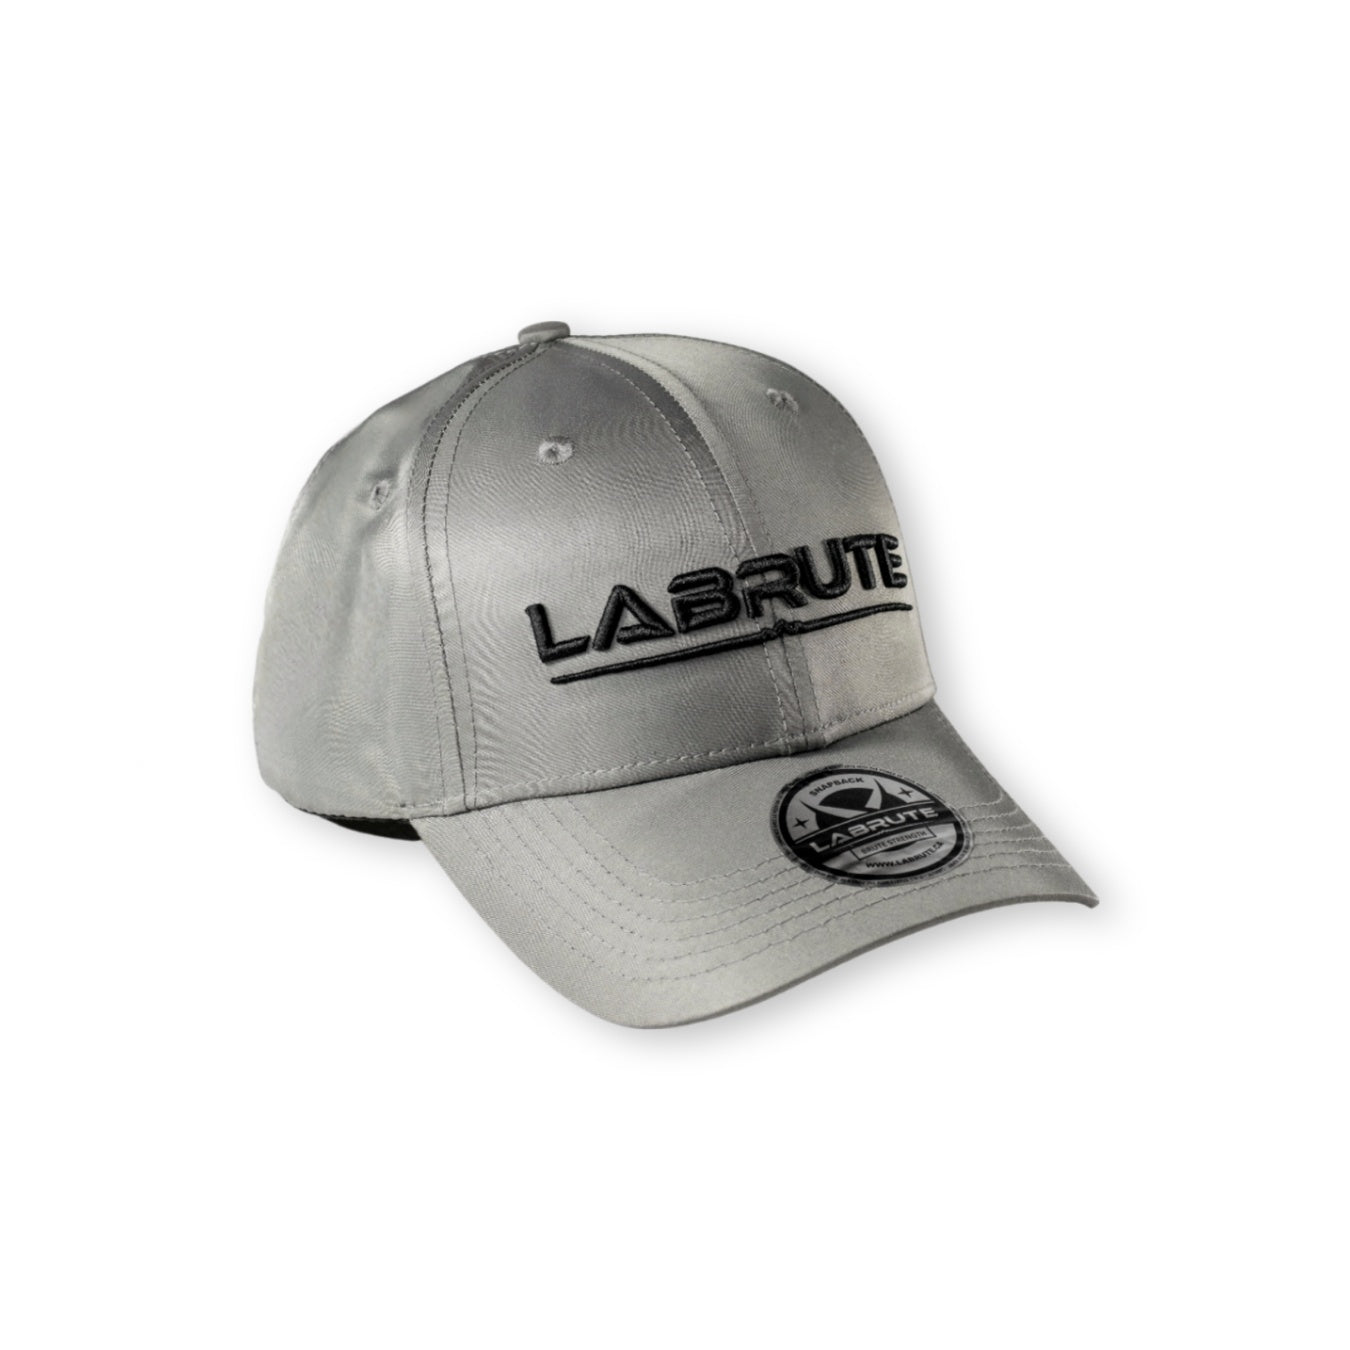 Labrute,brutestrength,premiumwear,activewear,gymwear,apparel,Canada,Québec,casual,clothing,caps,hat,casquettes,accessories,accessoires,fit,gray,gris,recycle,nylon